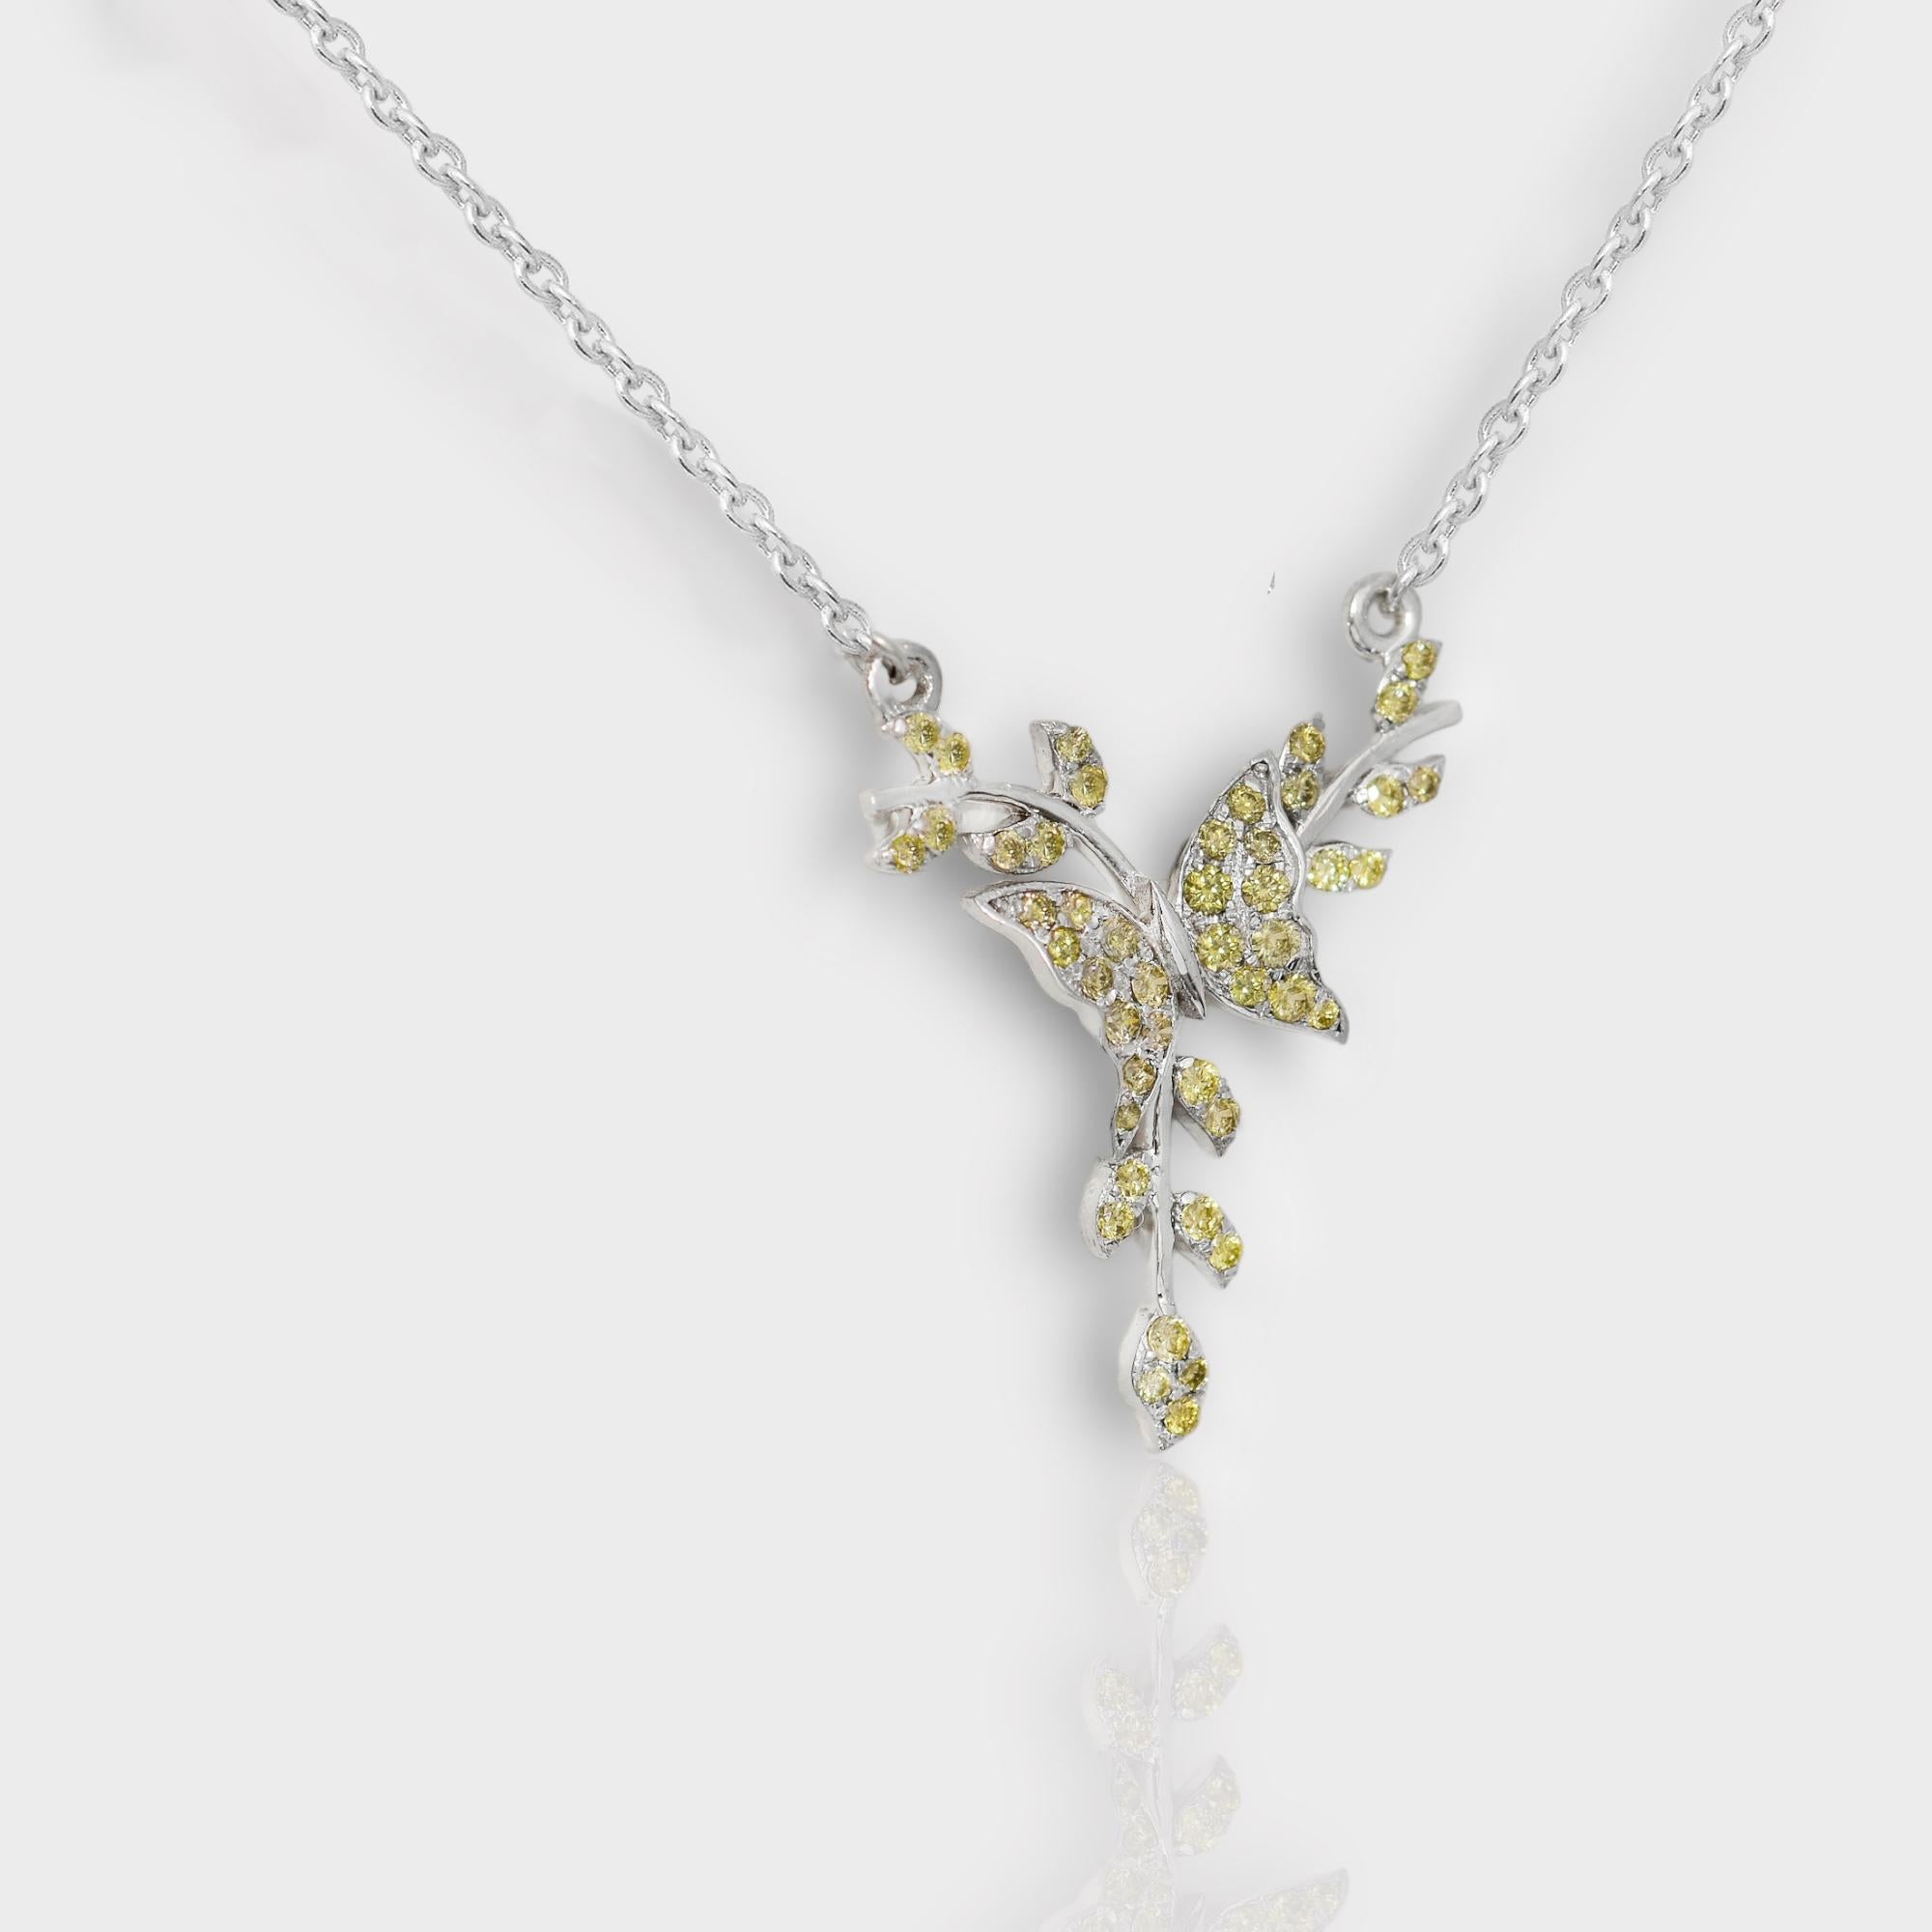 IGI 14K 0.25 ct Natural Greenish Yellow Diamonds Branches Design Necklace In New Condition For Sale In Kaohsiung City, TW